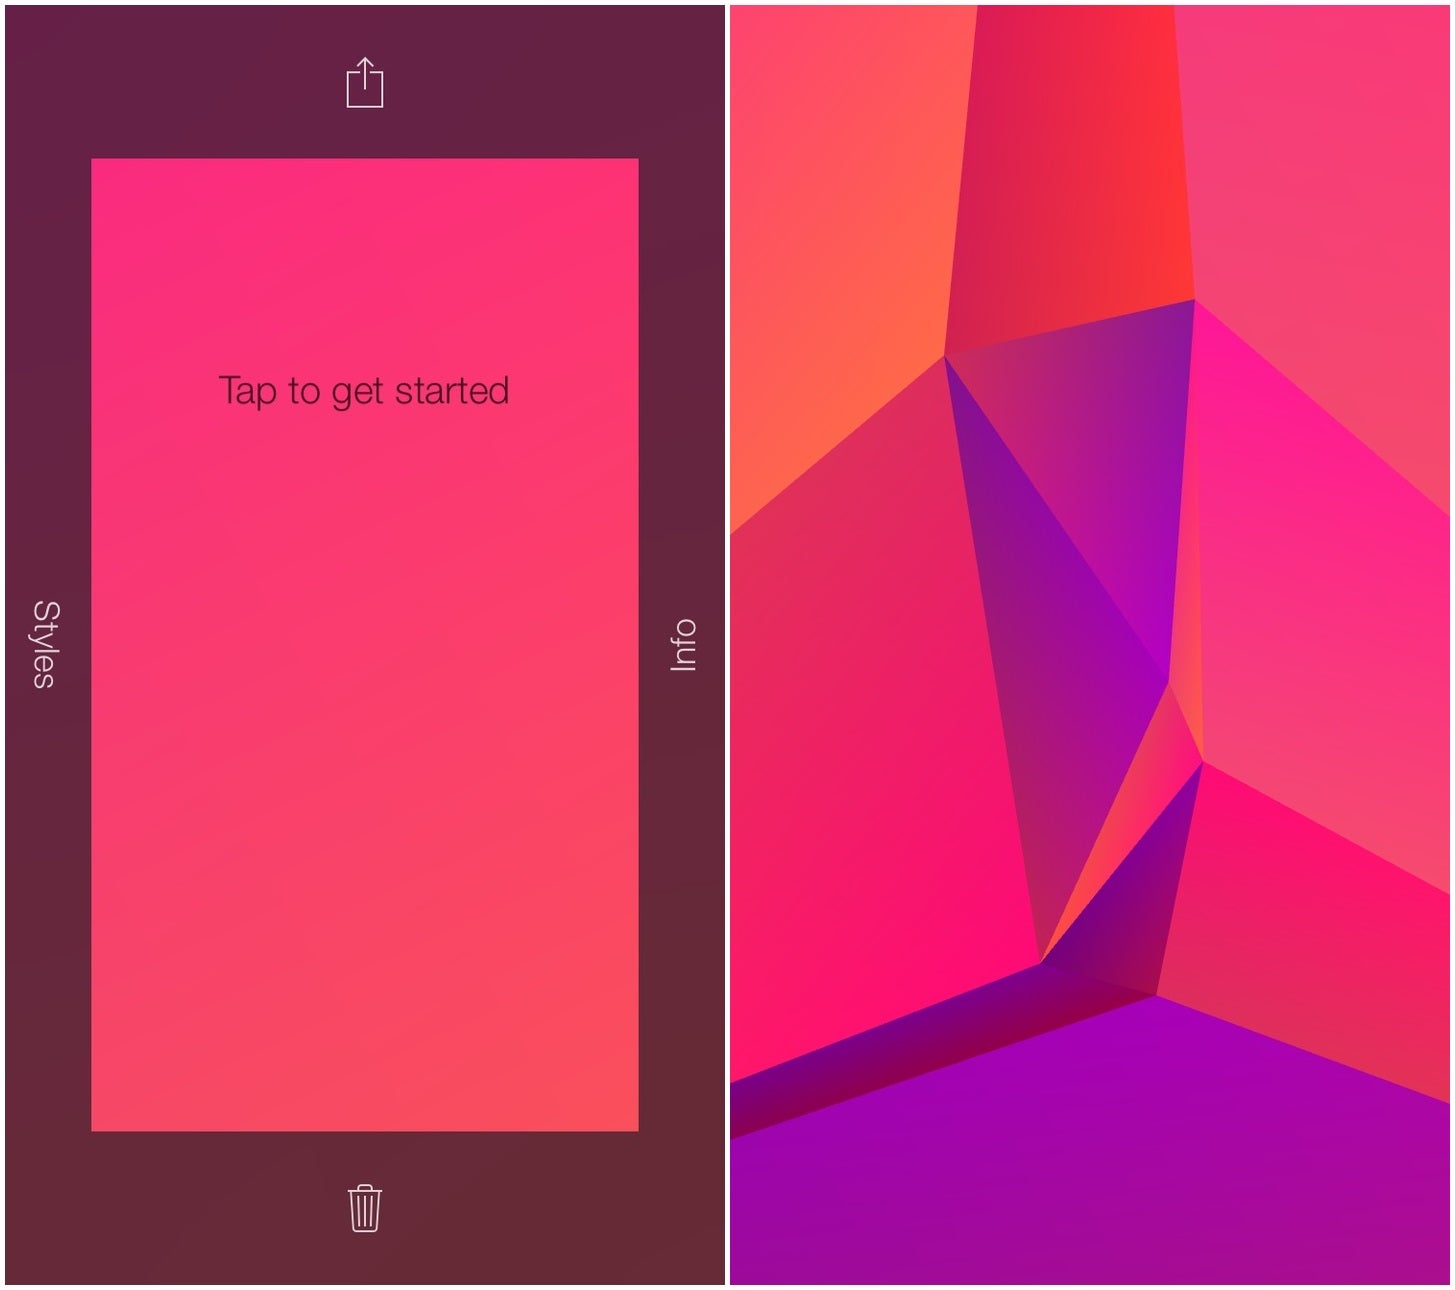 How to trick out your phone with some sweet custom polygonal wallpapers on Android and iOS